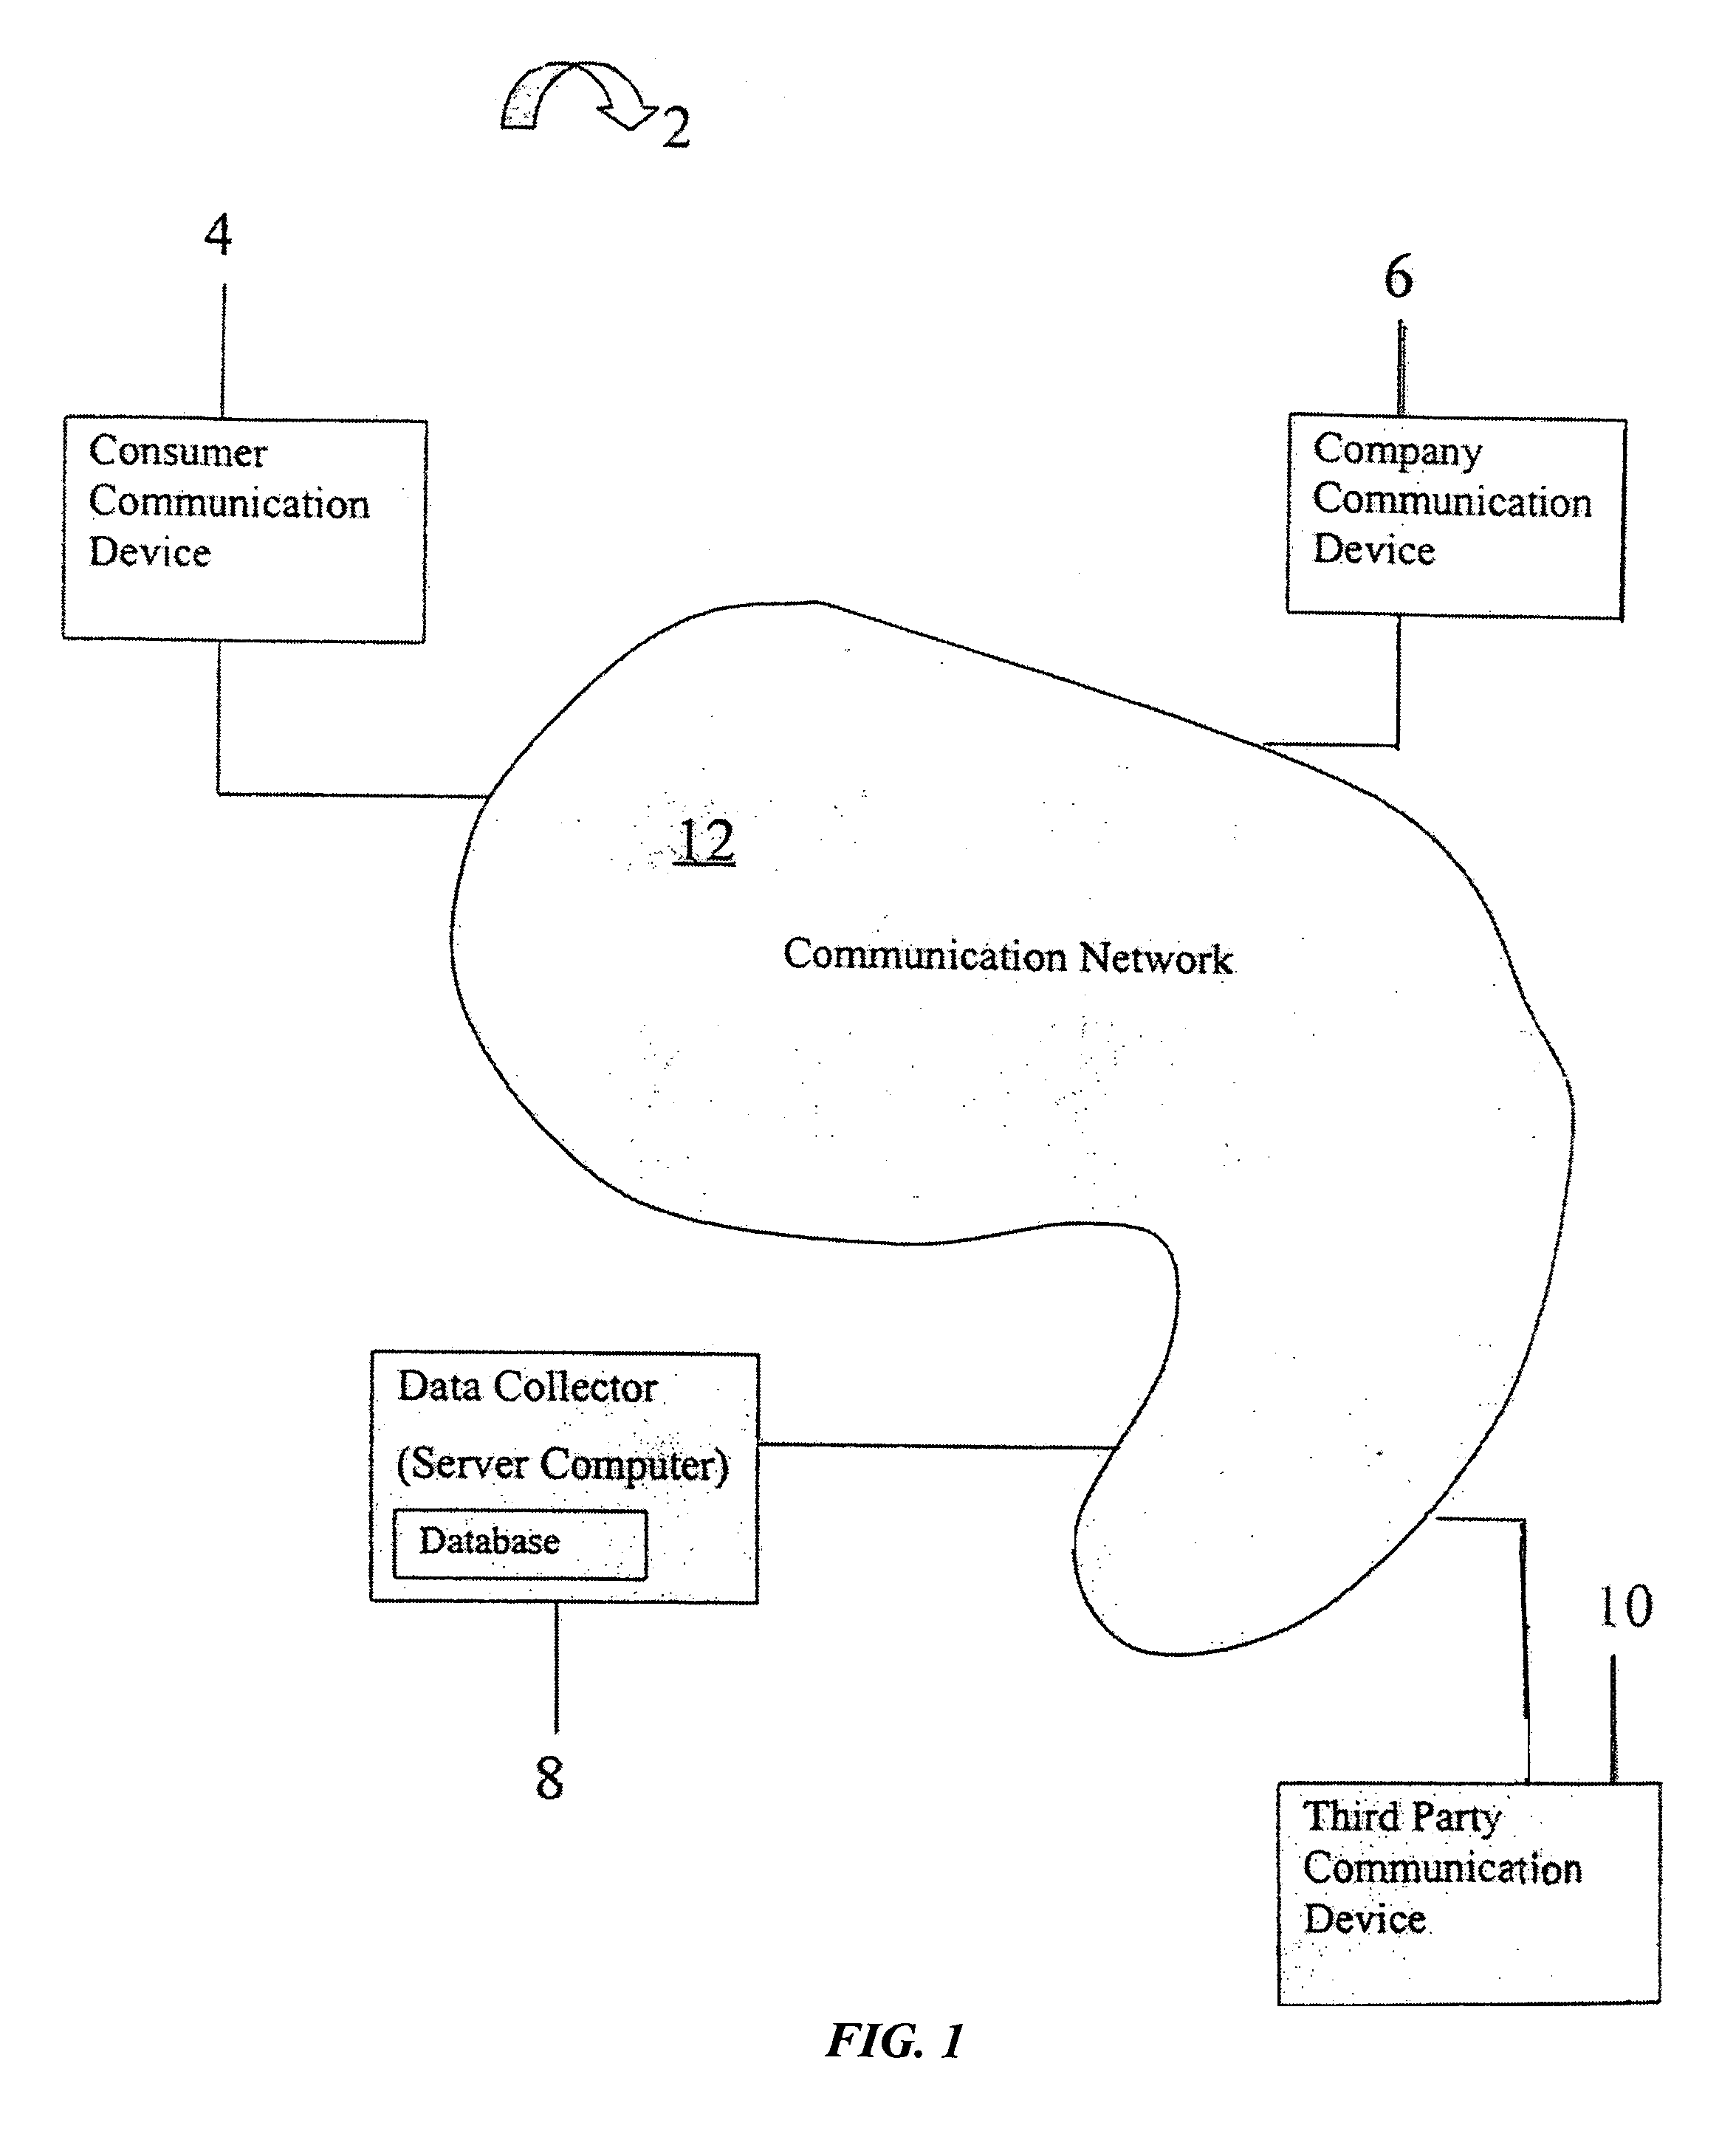 Electronic customer service and rating system and method